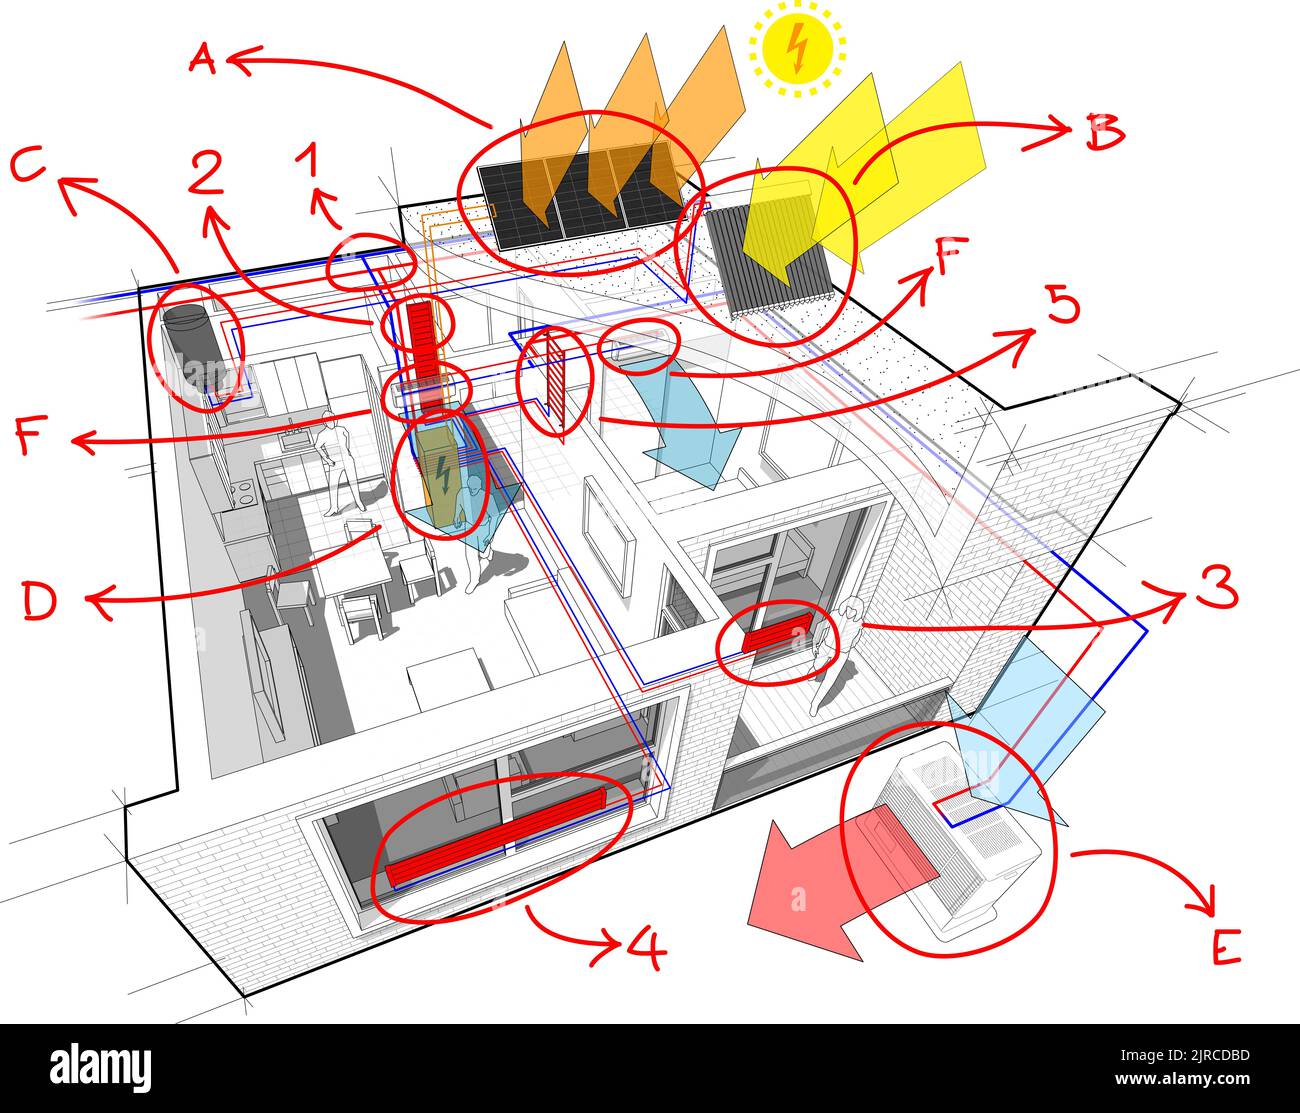 Apartment with radiators and photovoltaics and solars and air conditioning and hand drawn notes Stock Photo